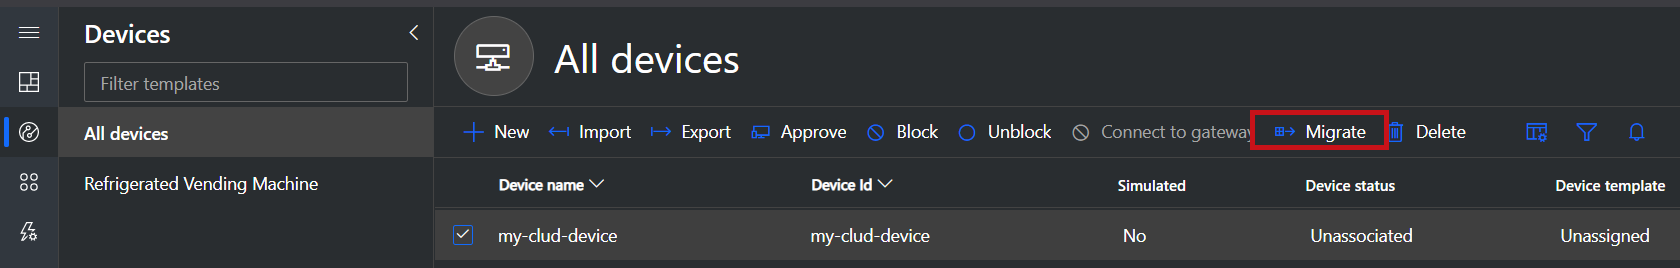 Migrate device